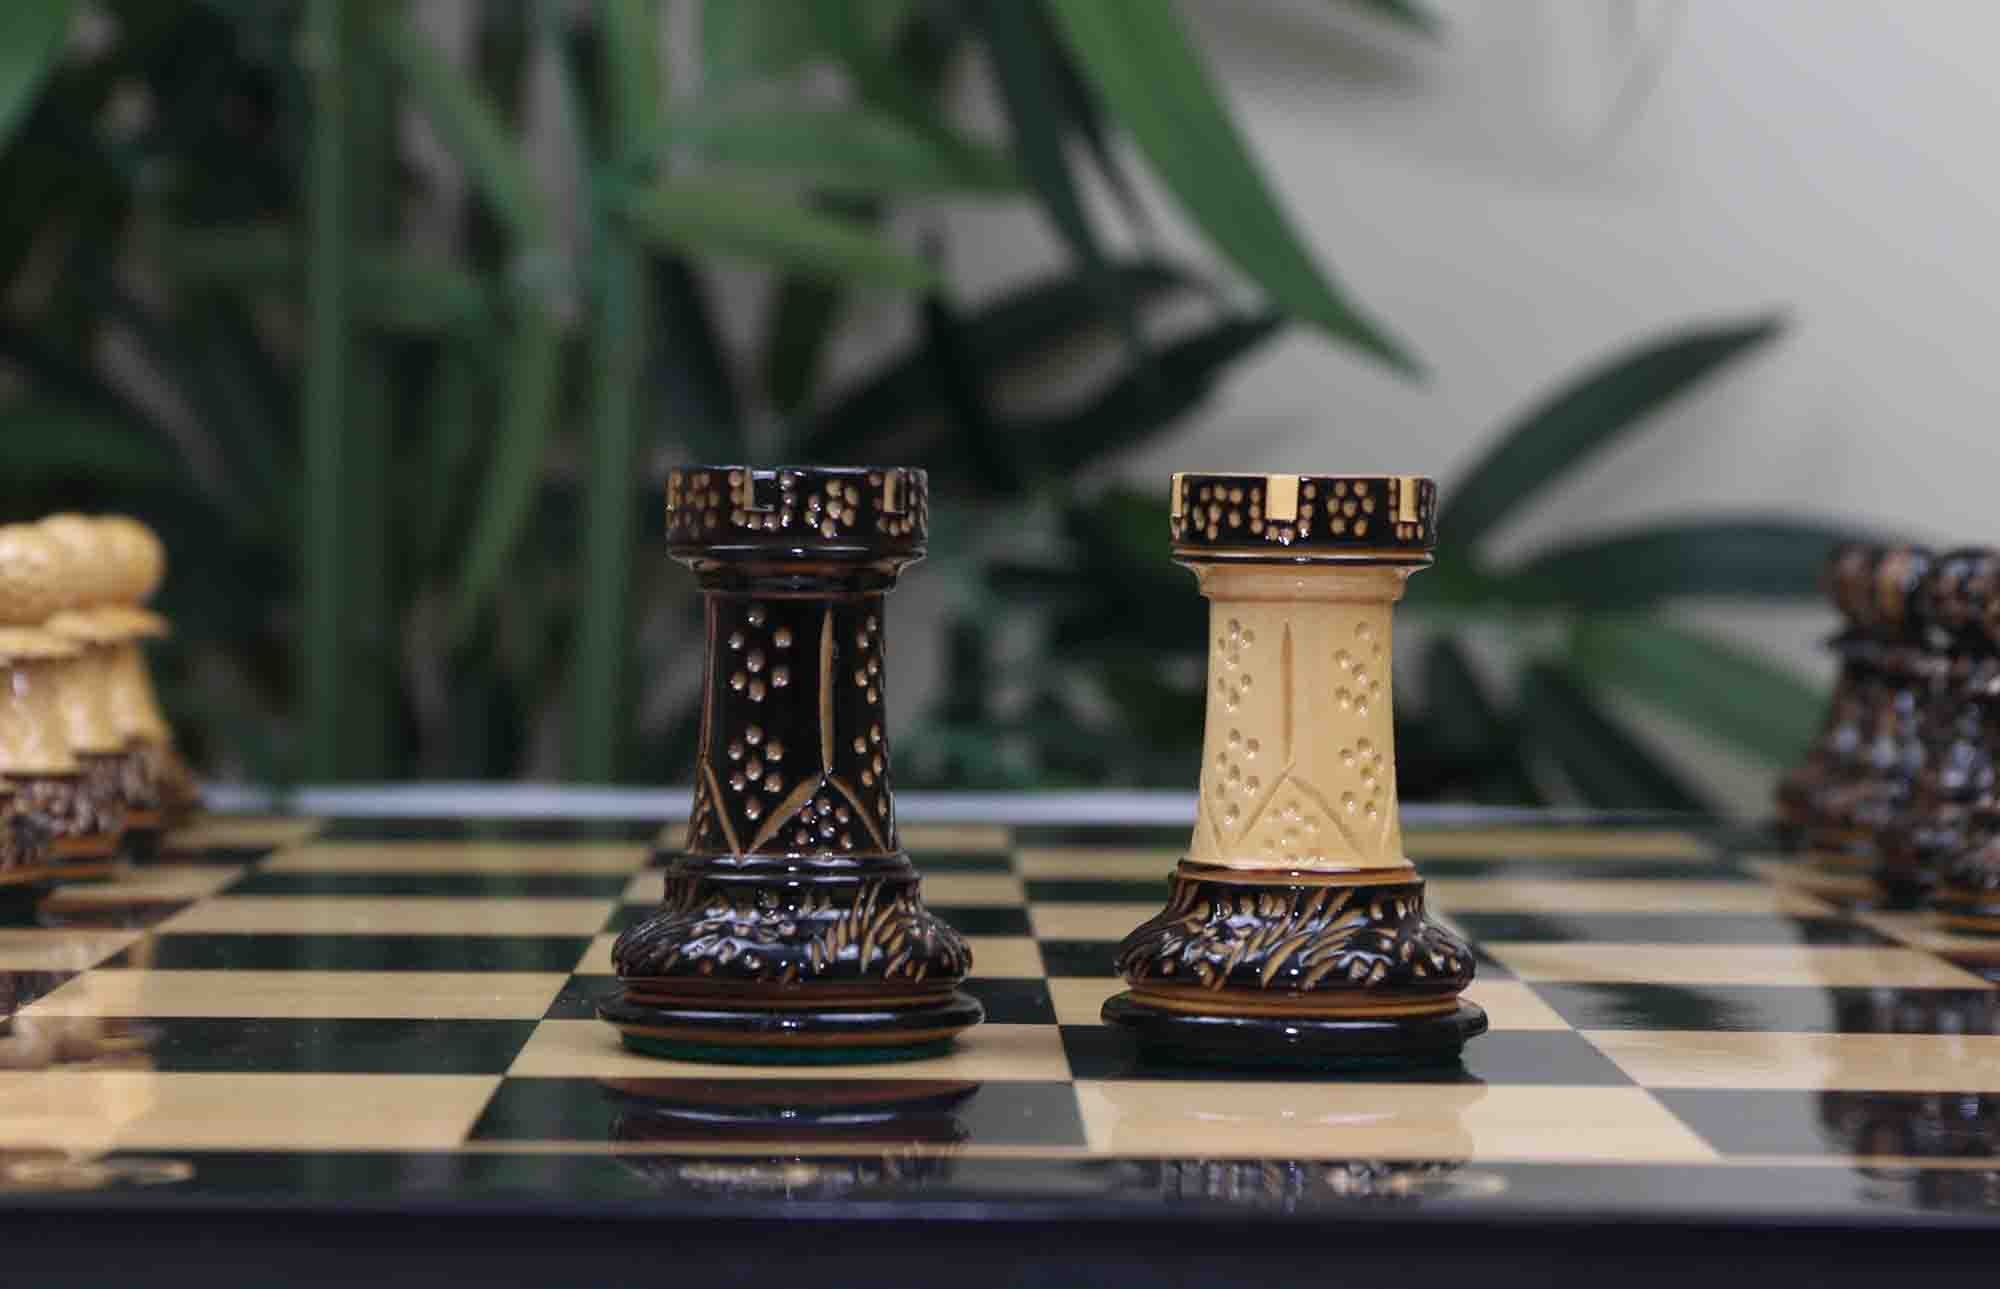 Zagreb '59 Series Luxury Chessmen in Lacquered Burnt Boxwood - 3.75" King Height